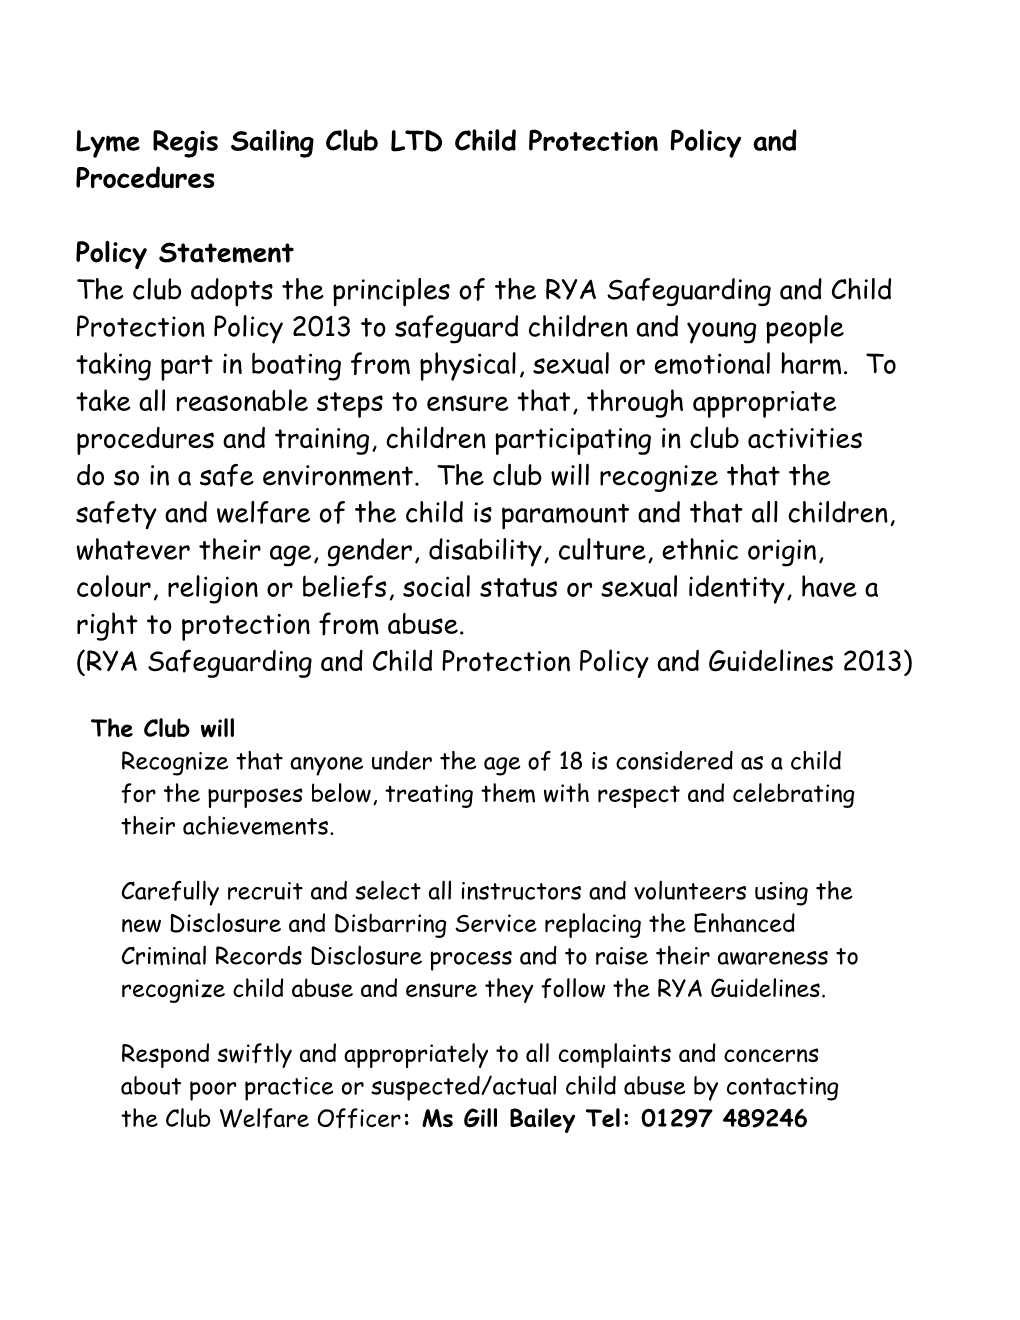 Lyme Regis Sailing Club LTD Child Protection Policy and Procedures